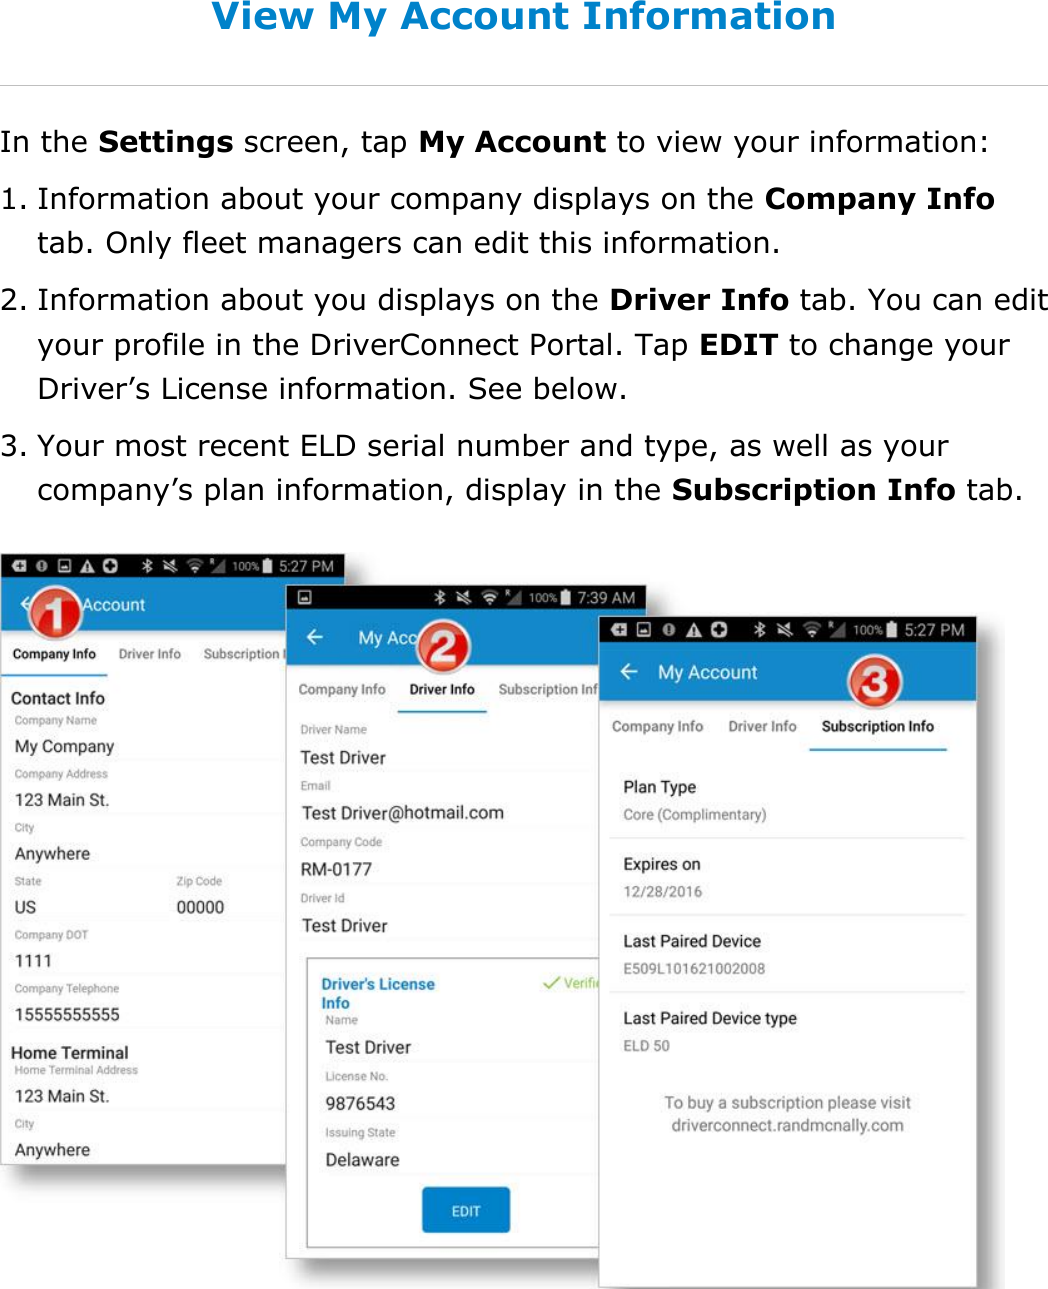  DriverConnect User Guide  91 © 2017, Rand McNally, Inc. View My Account Information In the Settings screen, tap My Account to view your information: 1. Information about your company displays on the Company Info tab. Only fleet managers can edit this information. 2. Information about you displays on the Driver Info tab. You can edit your profile in the DriverConnect Portal. Tap EDIT to change your Driver’s License information. See below.  3. Your most recent ELD serial number and type, as well as your company’s plan information, display in the Subscription Info tab.    